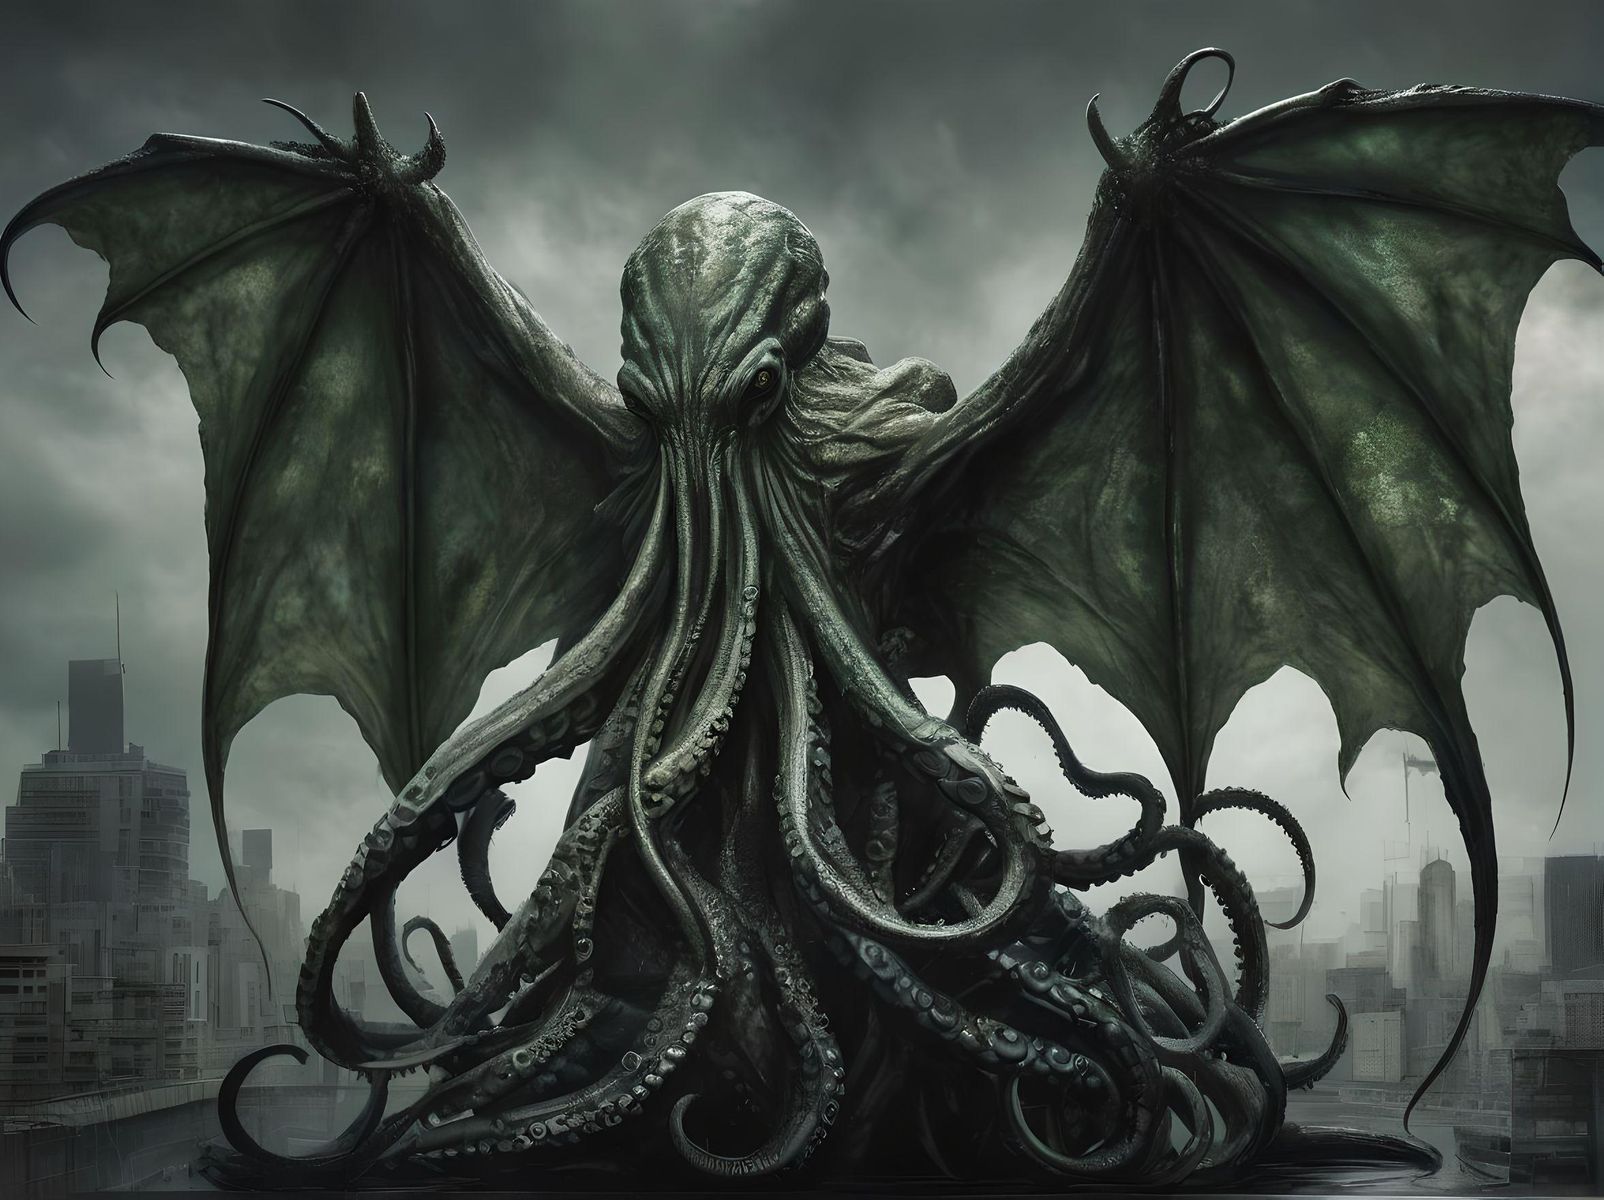 Obscure picture, devoid of beauty or hope, fear inducing, Cthulhu a monster of vaguely anthropoid outline, but with an octopus-like head whose face was a mass of feelers, a scaly, rubbery-looking body, prodigious claws on hind and fore feet, and long, narrow wings behind, emerging from R'lyeh's city of bizarre architecture is characterized by its non-Euclidean geometry, colossal structures, and shifts in perspective that can make an observer unsure about what is vertical and what is horizontal, black and greenish light, brutal composition, gloomy, intense dark tones, leaving an indelible and haunting impression on psyche, very intricate, in the style of Russ Mills and Milo Manara 